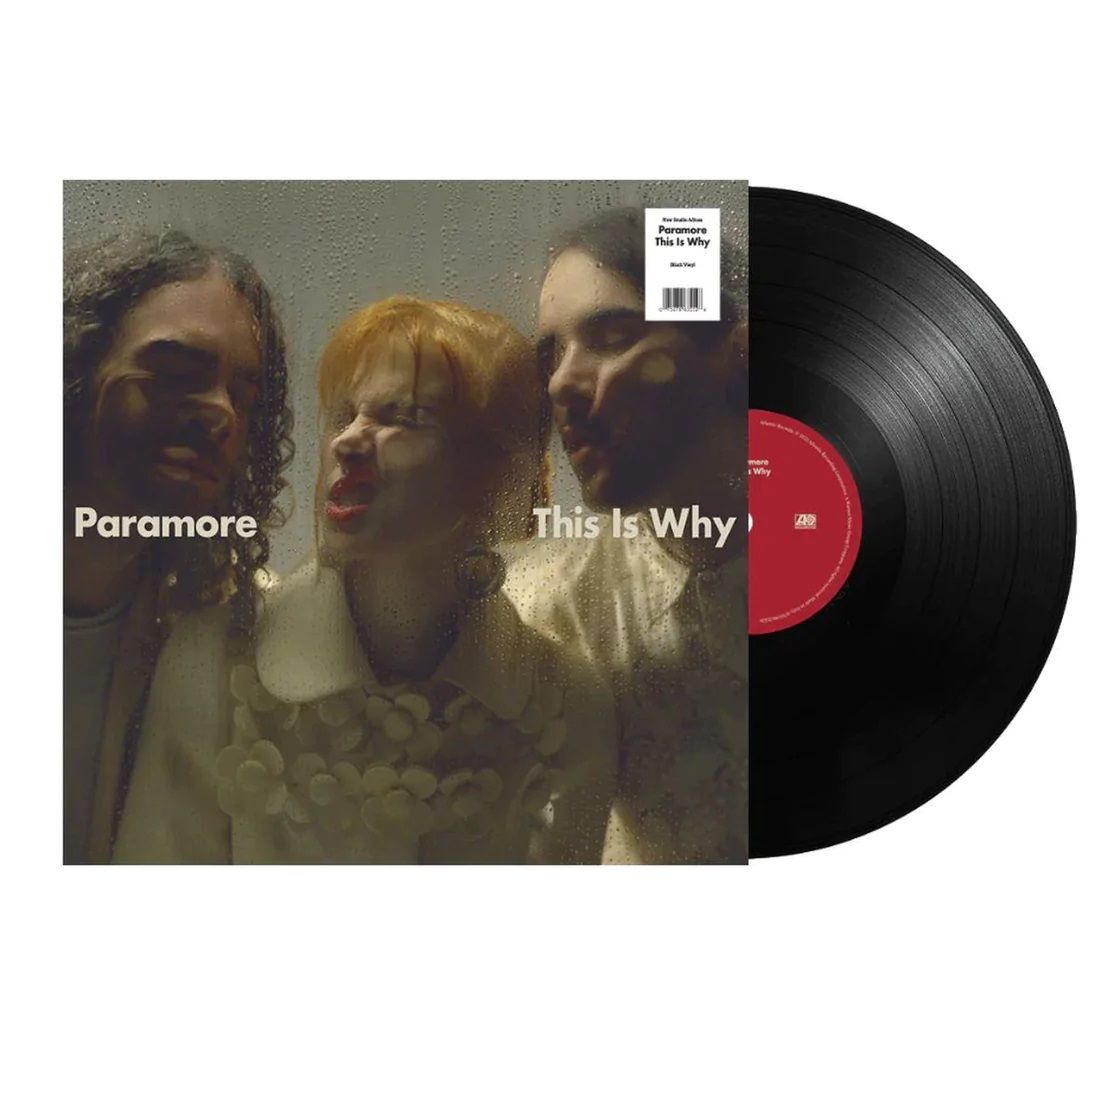 Paramore - This Is Why - Vinyl - New